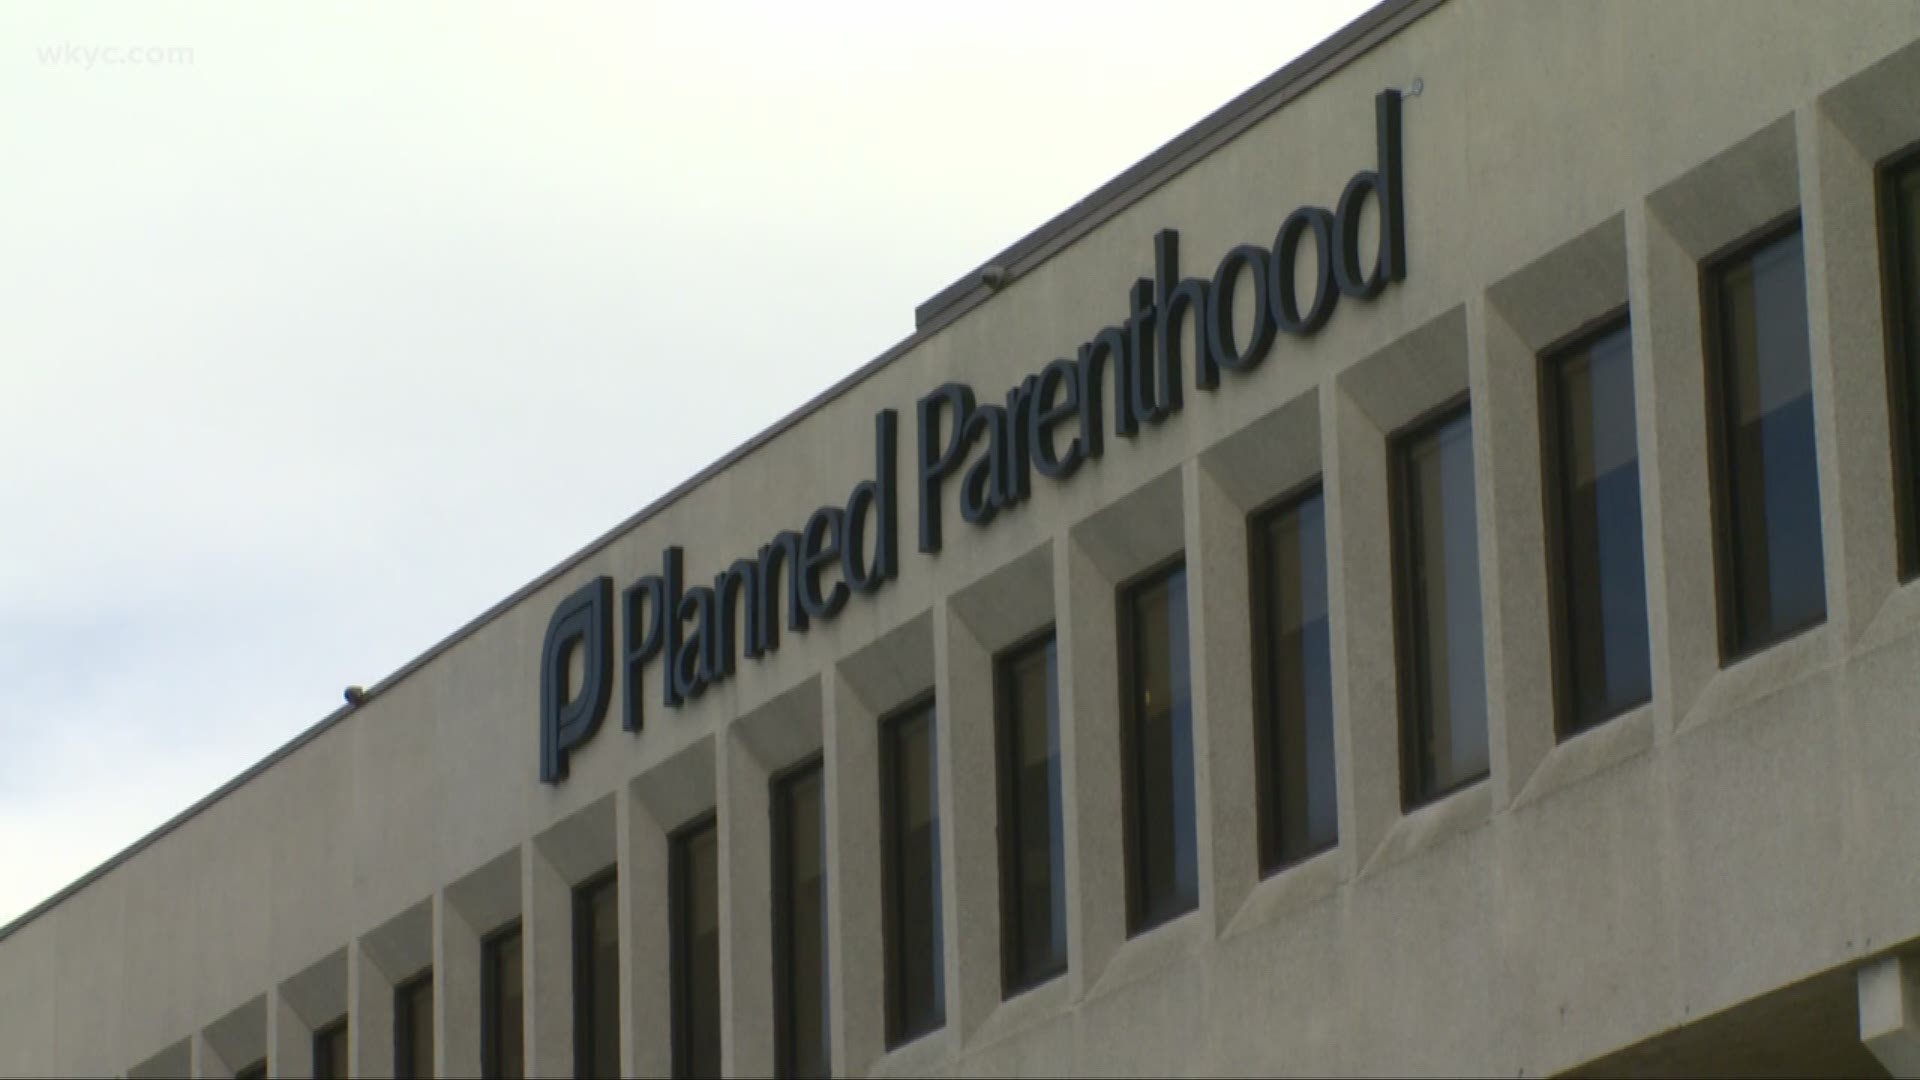 Ohio cuts funding for Planned Parenthood